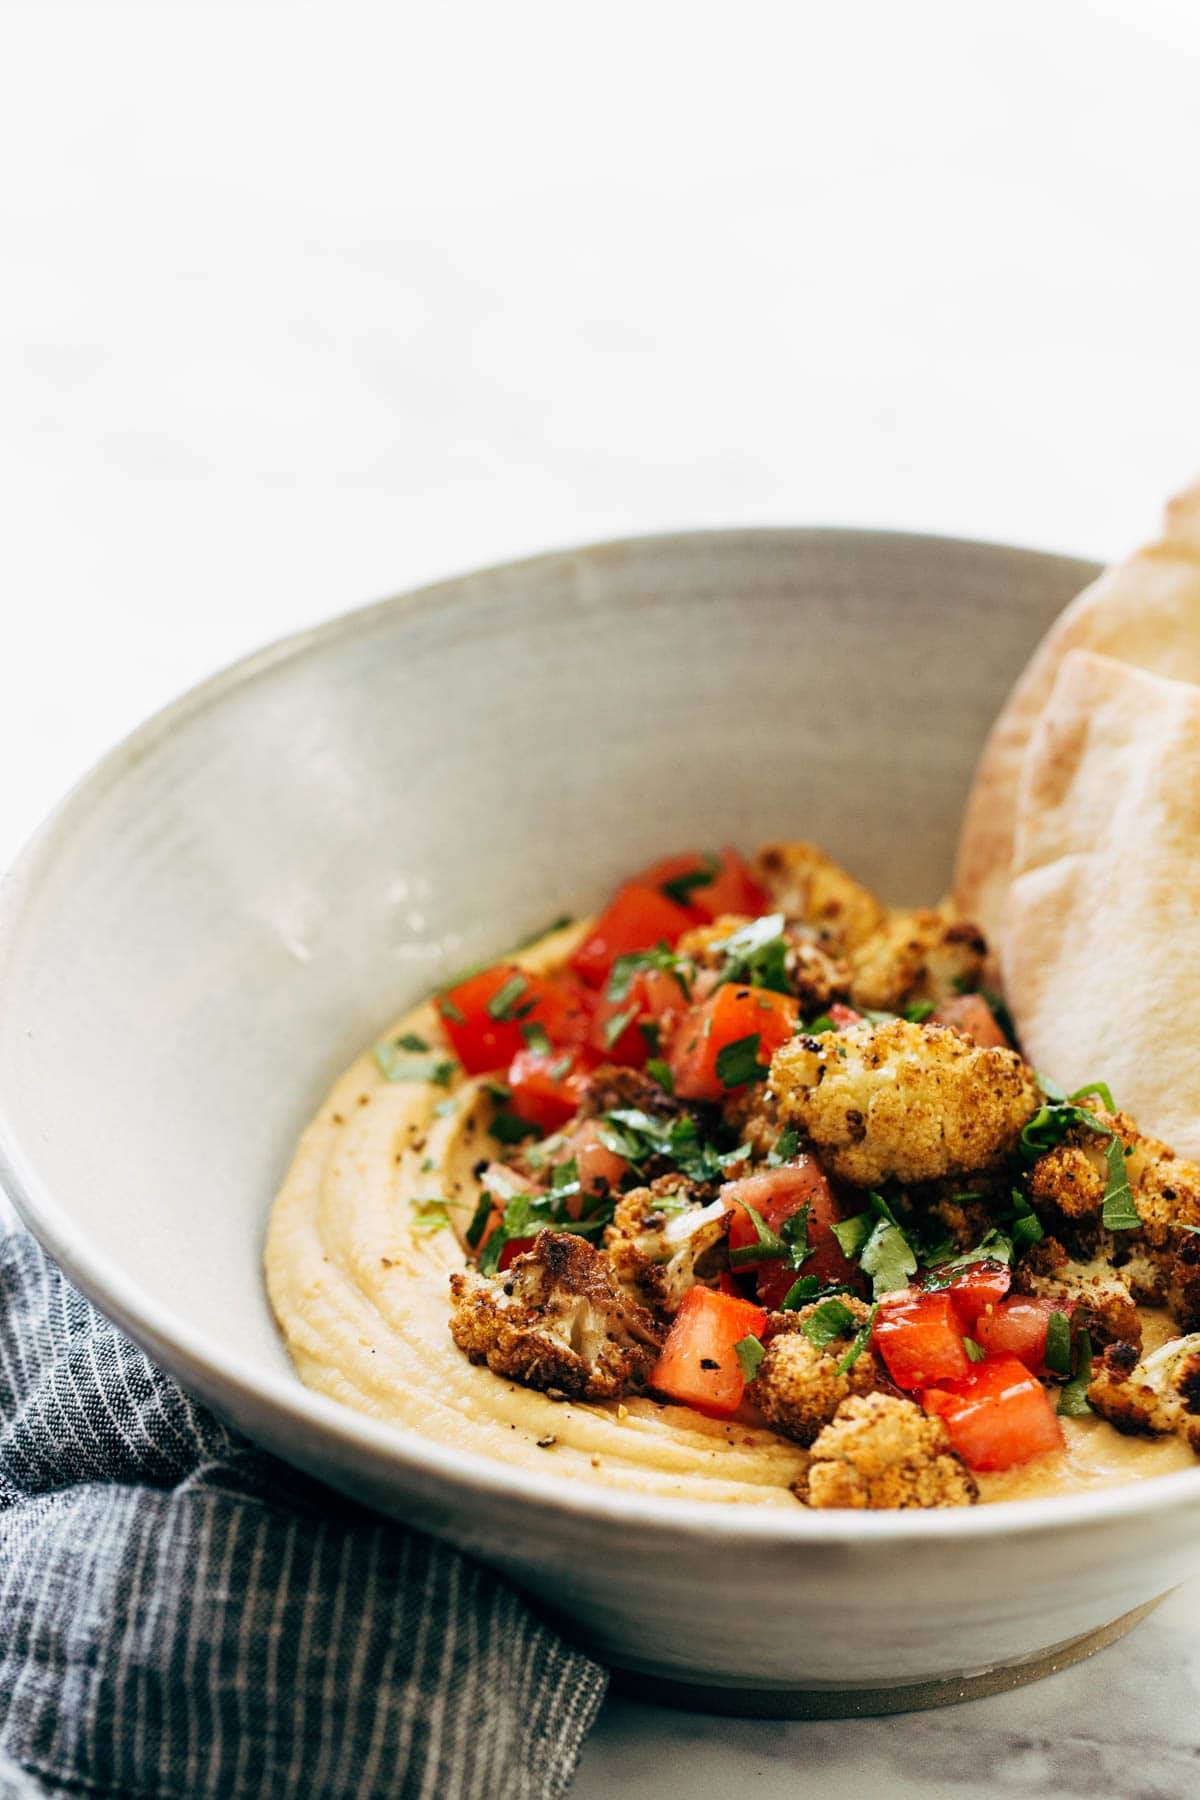 Hummus with roasted cauliflower in a bowl.